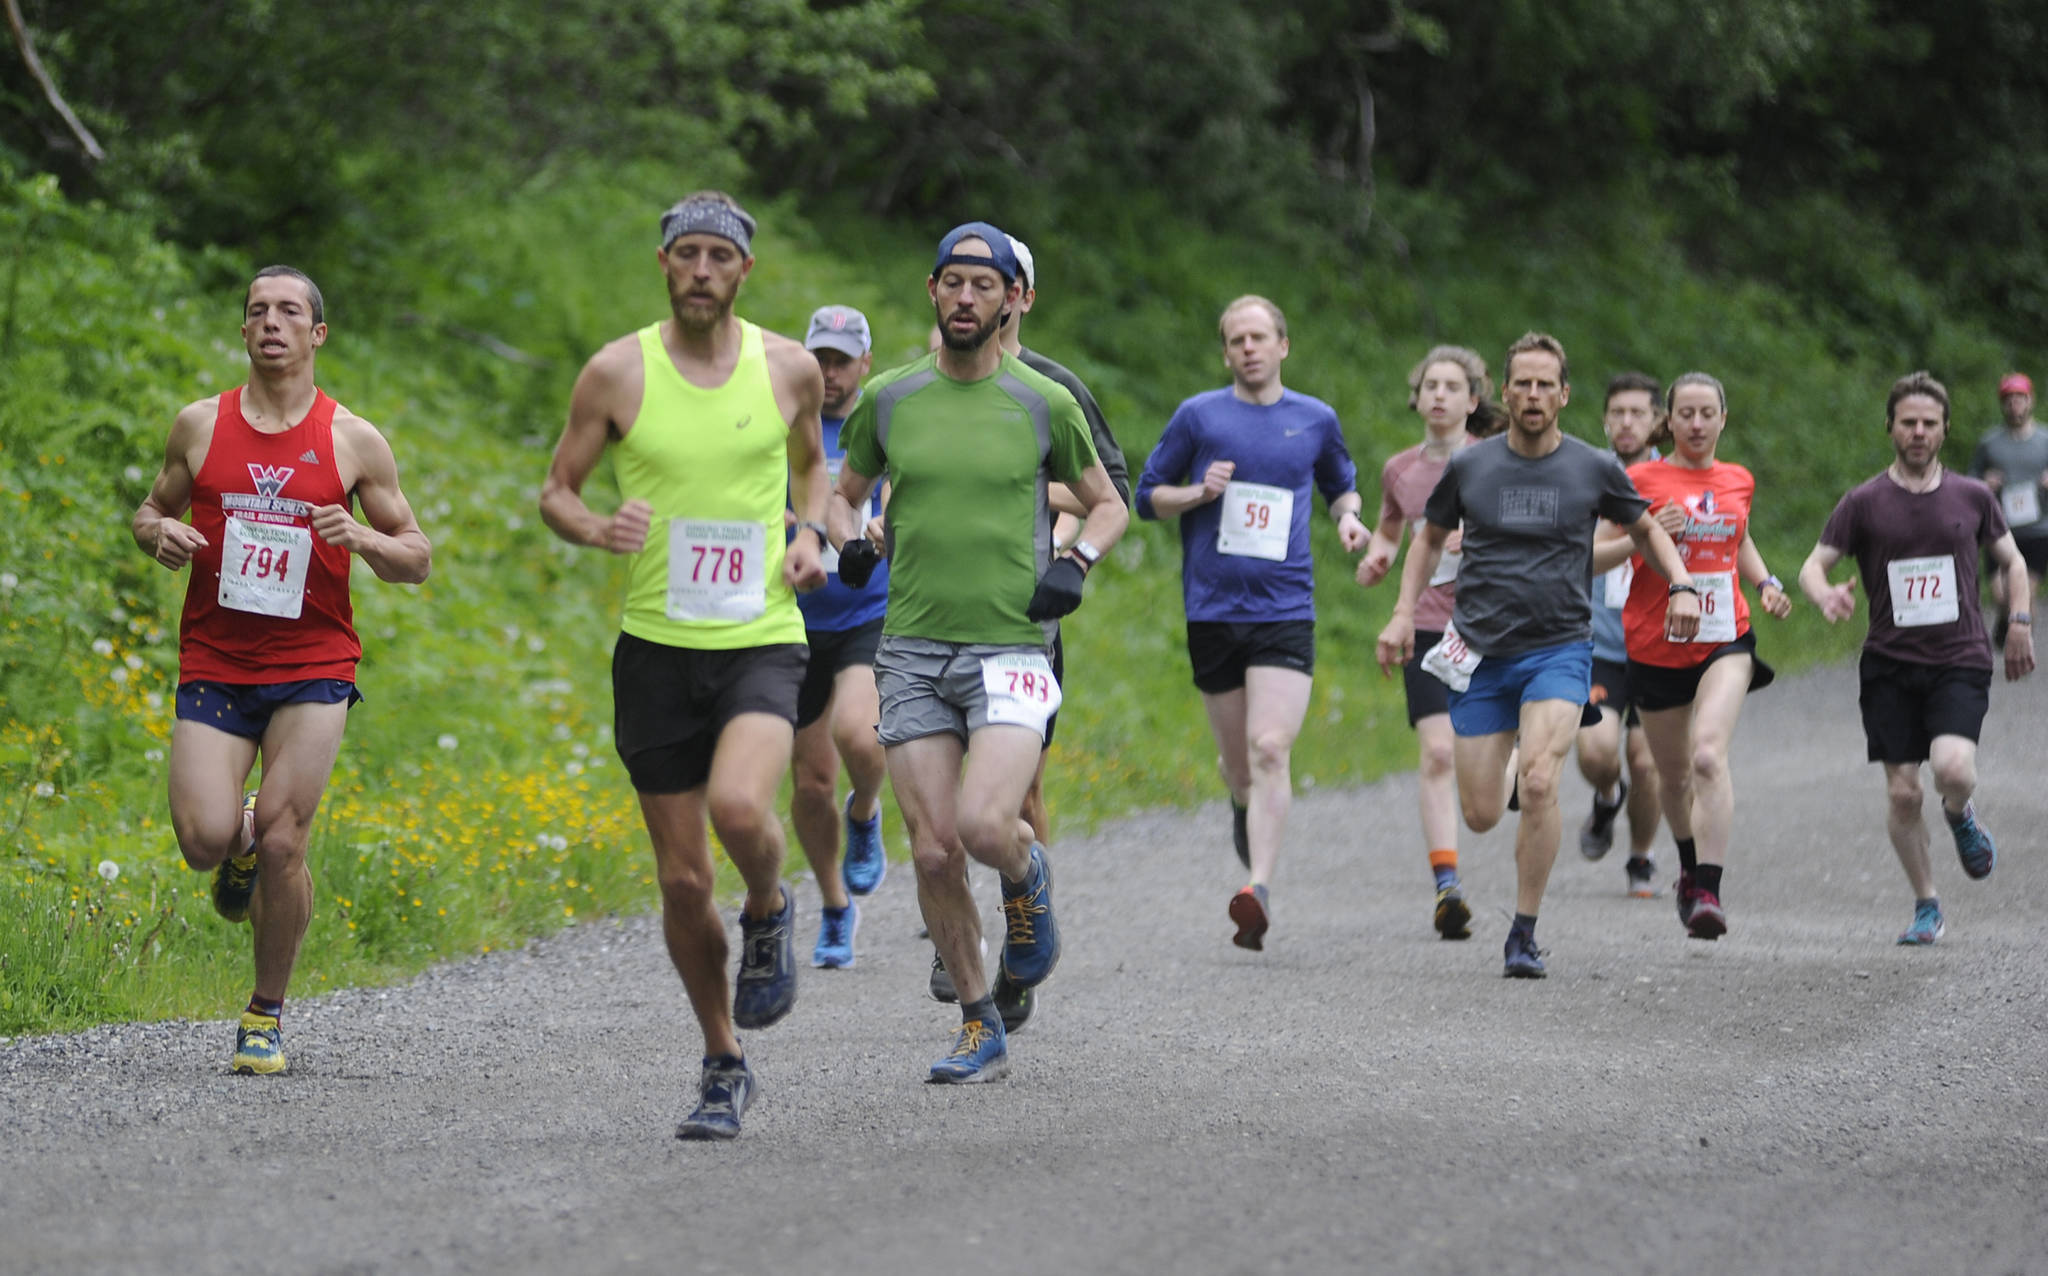 Seth Rutt (yellow singlet) leads a pack of runners on Basin Road during the start of the Perseverance Trail Run/Ben Blackgoat Memorial on Saturday. Rutt finished the 7-mile course in second place behind Allan Spangler (not pictured). (Nolin Ainsworth | Juneau Empire)